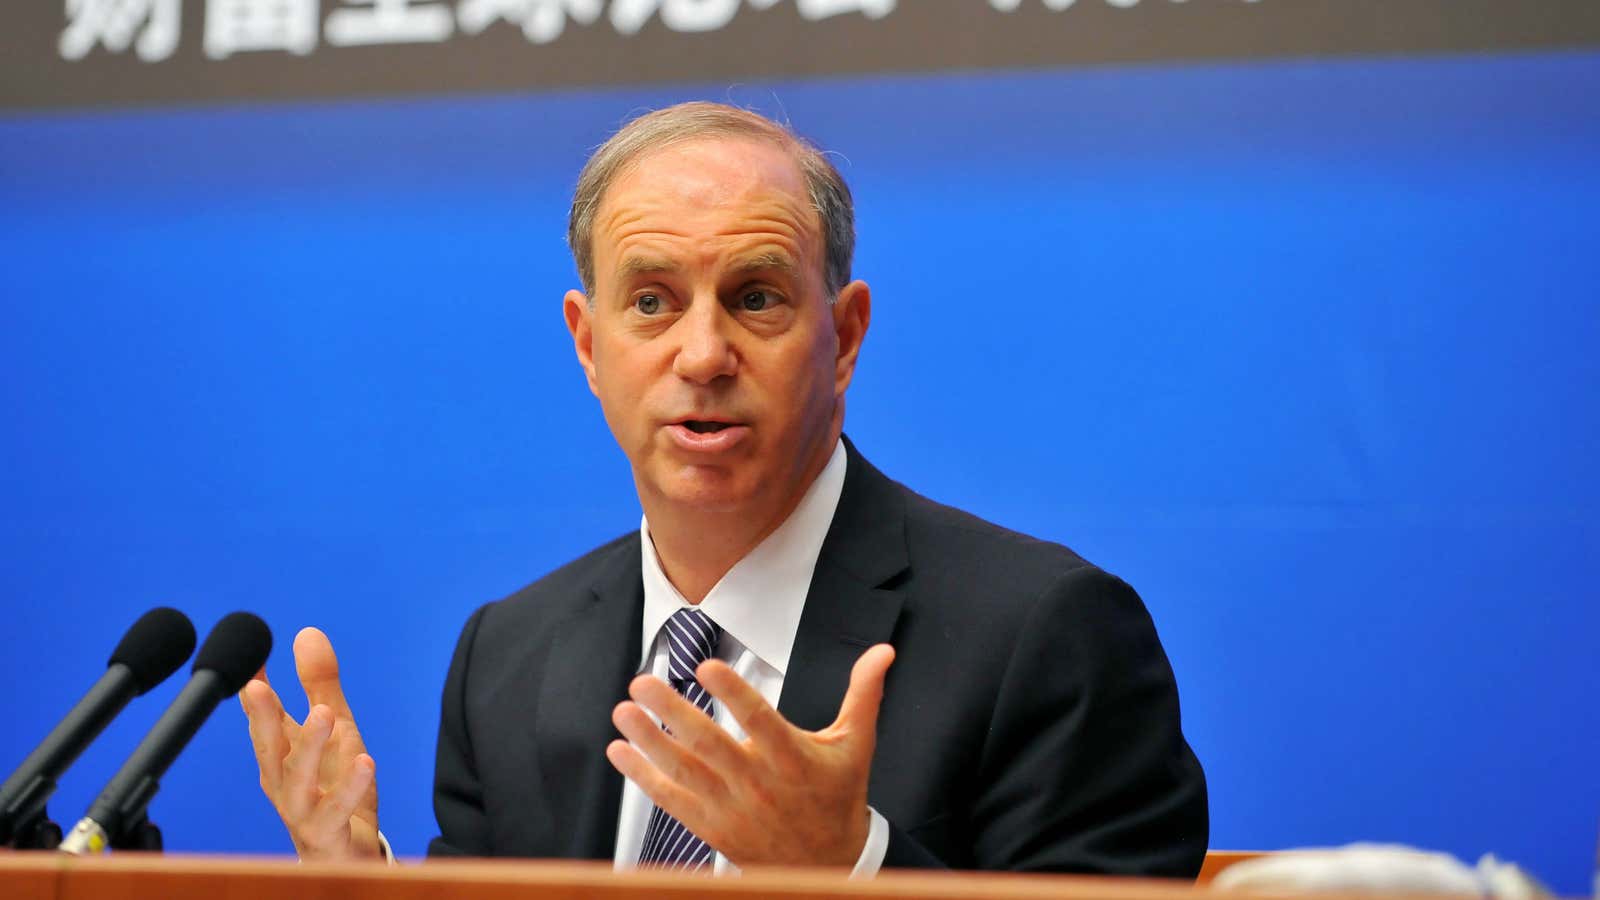 Andy Serwer, managing editor of Fortune magazine, speaks at the forum in Chengdu. “Anyone want to tweet this?”